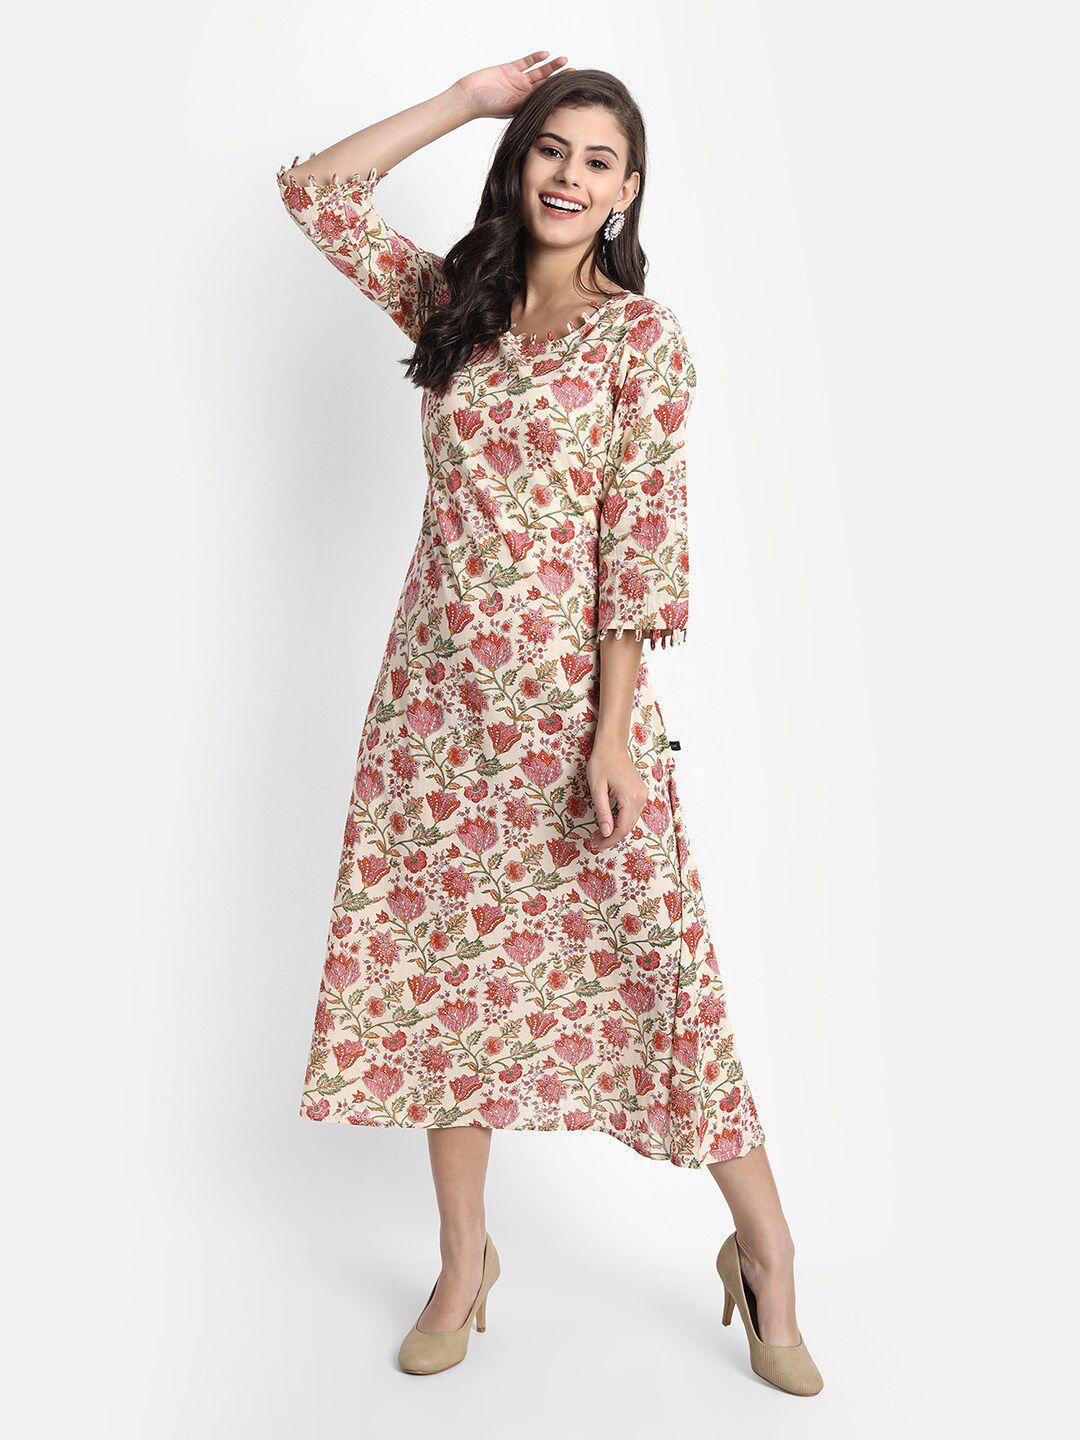 githaan off white floral a-line midi dress